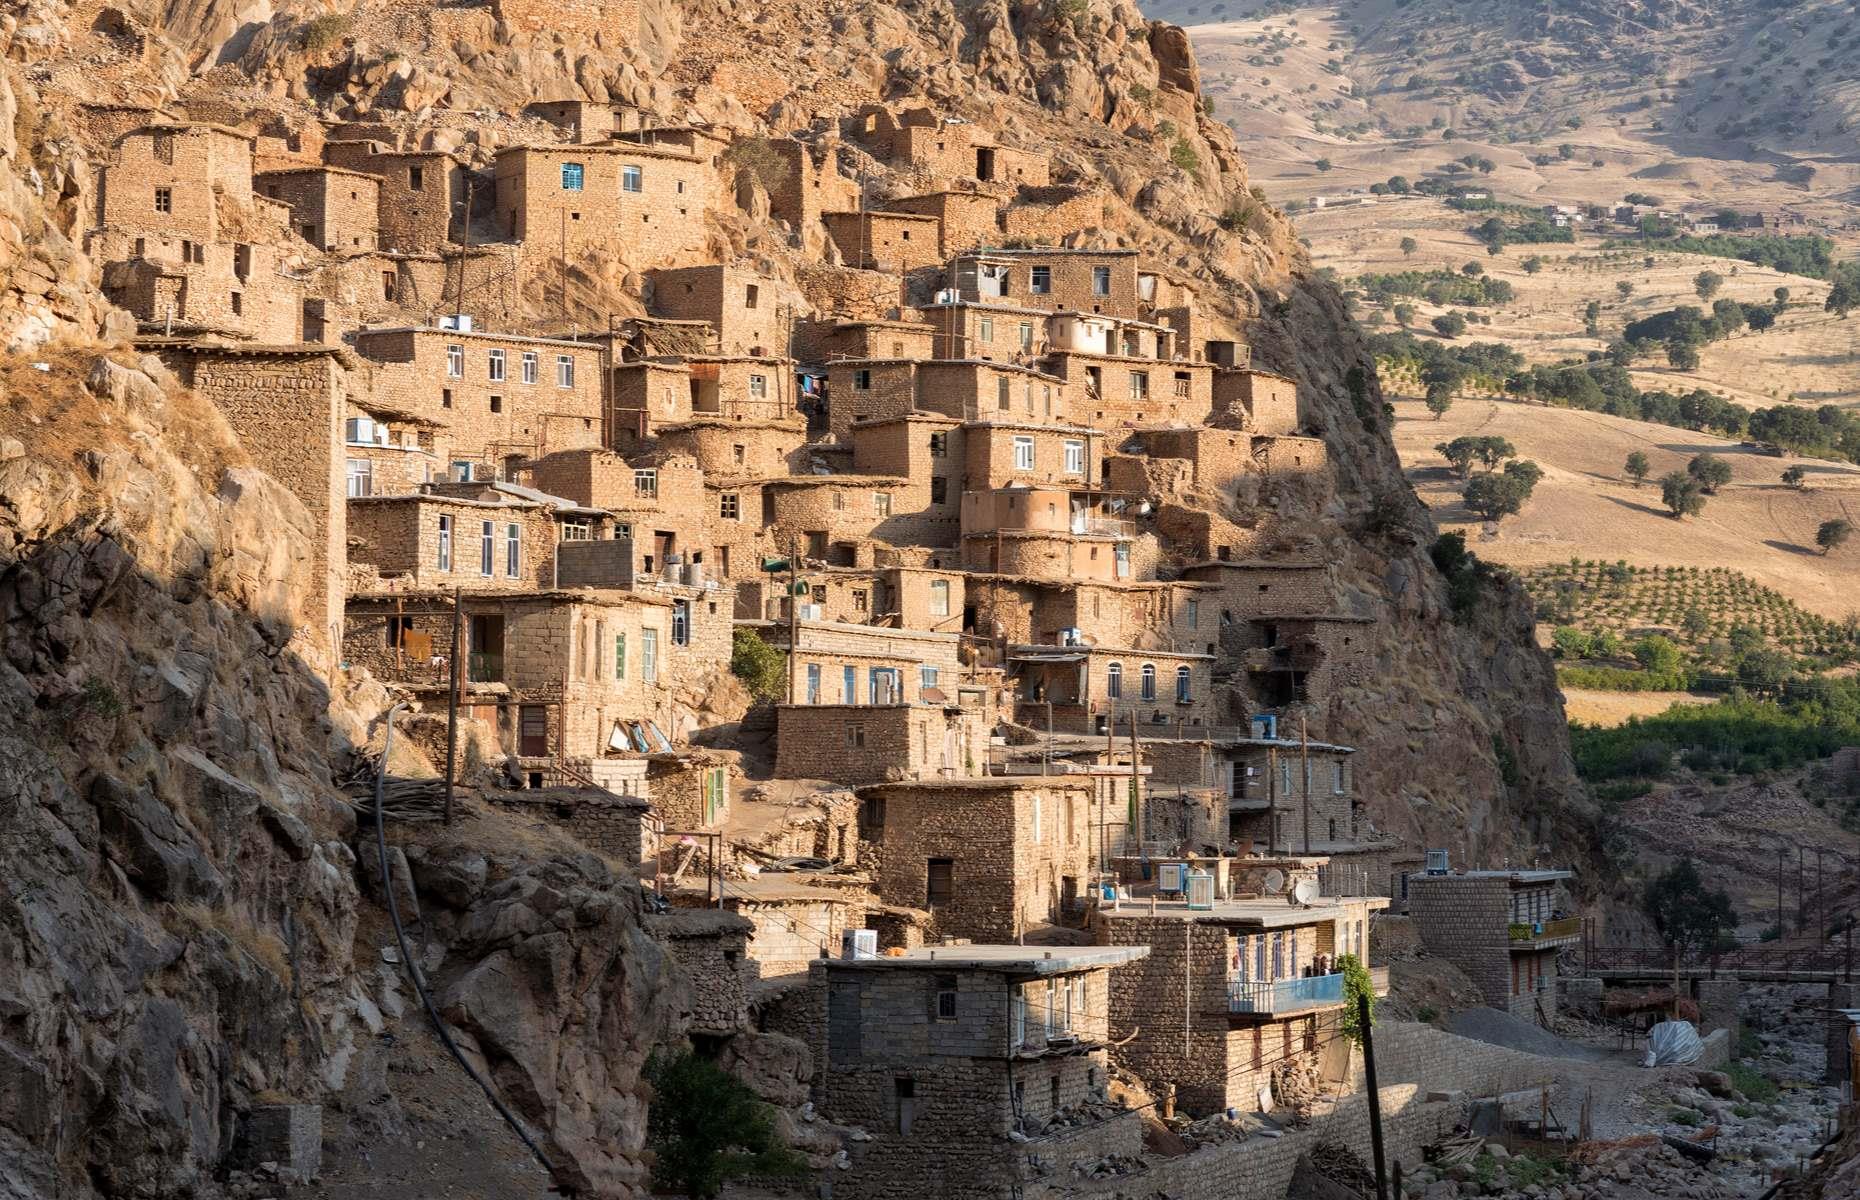 The small Iranian-Kurdish village of Palangan is embedded into a rock face so steep, it looks almost vertical. With a population of around 1,000, the village has been populated since the pre-Islamic period, although the houses that currently stand here were built around 500 years ago. With its vertiginous position and terraced houses blending into the mountain, it certainly looks storybook-inspired.